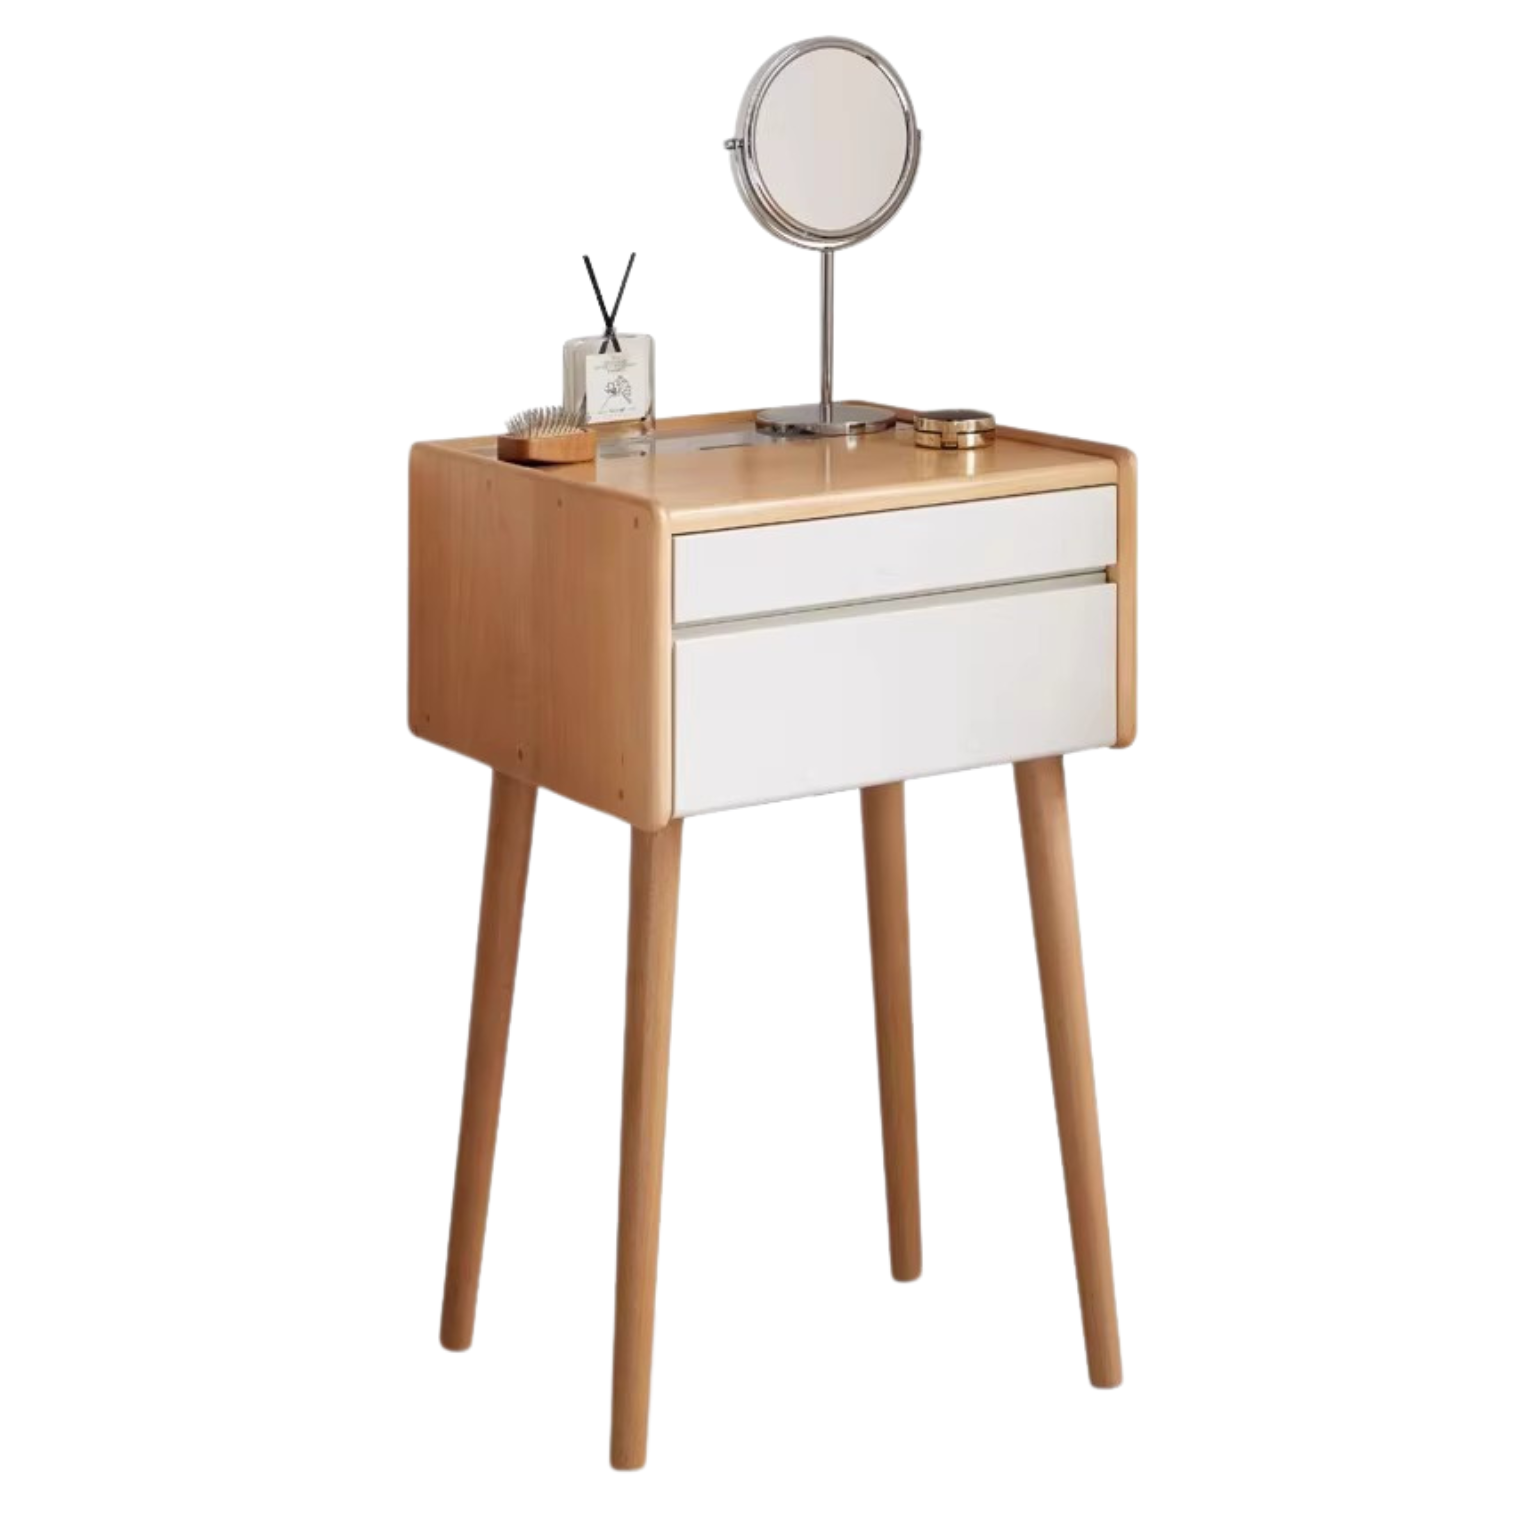 Beech Solid Wood Dressing Table Small Bedside Table-